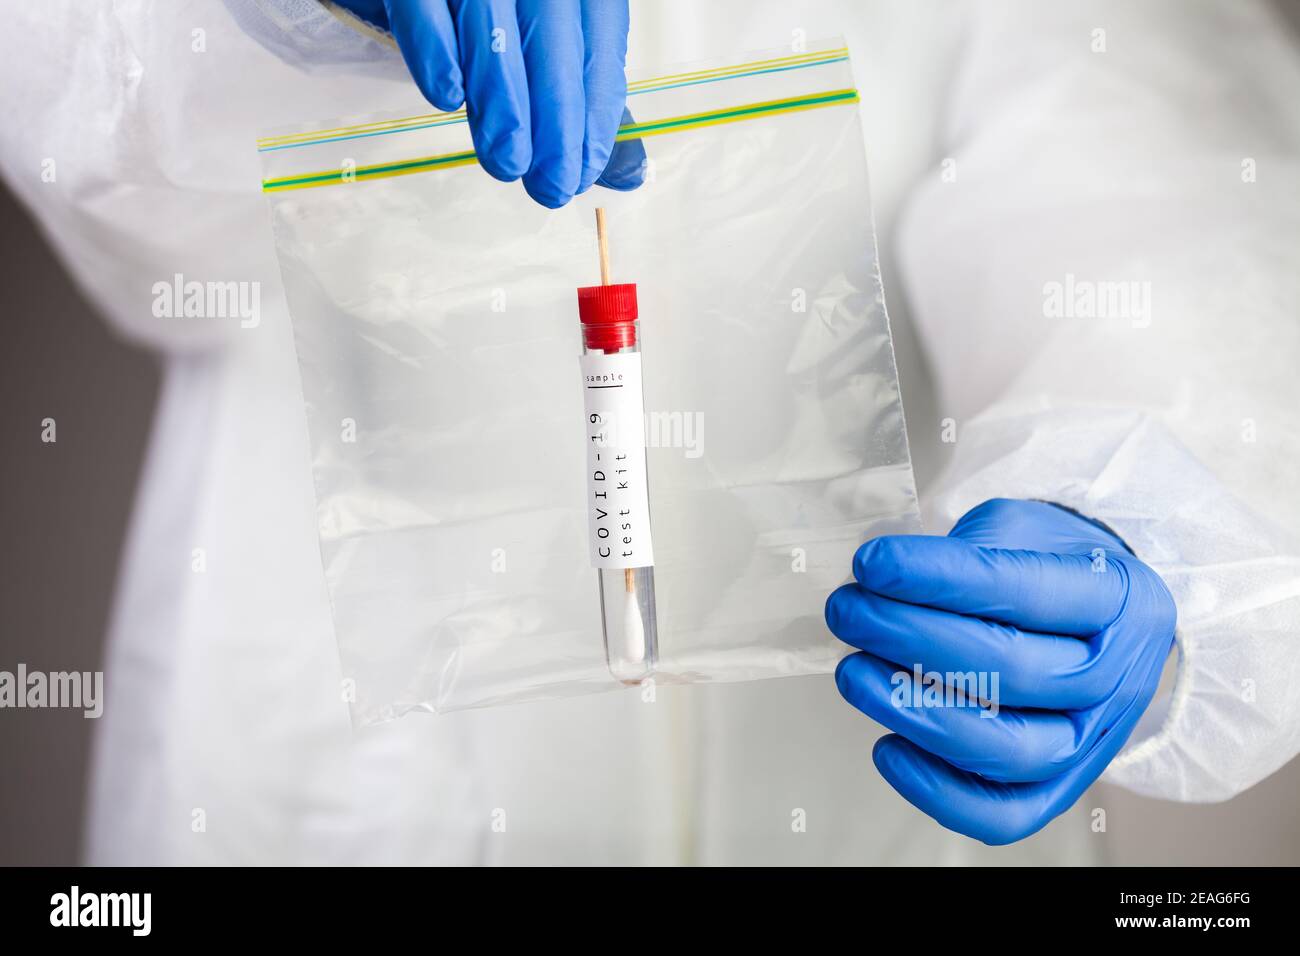 Coronavirus COVID-19 testing,swab collection equipment,sterile vacutainer with swabbing stick,closeup of hands holding a packaging bag containing spec Stock Photo